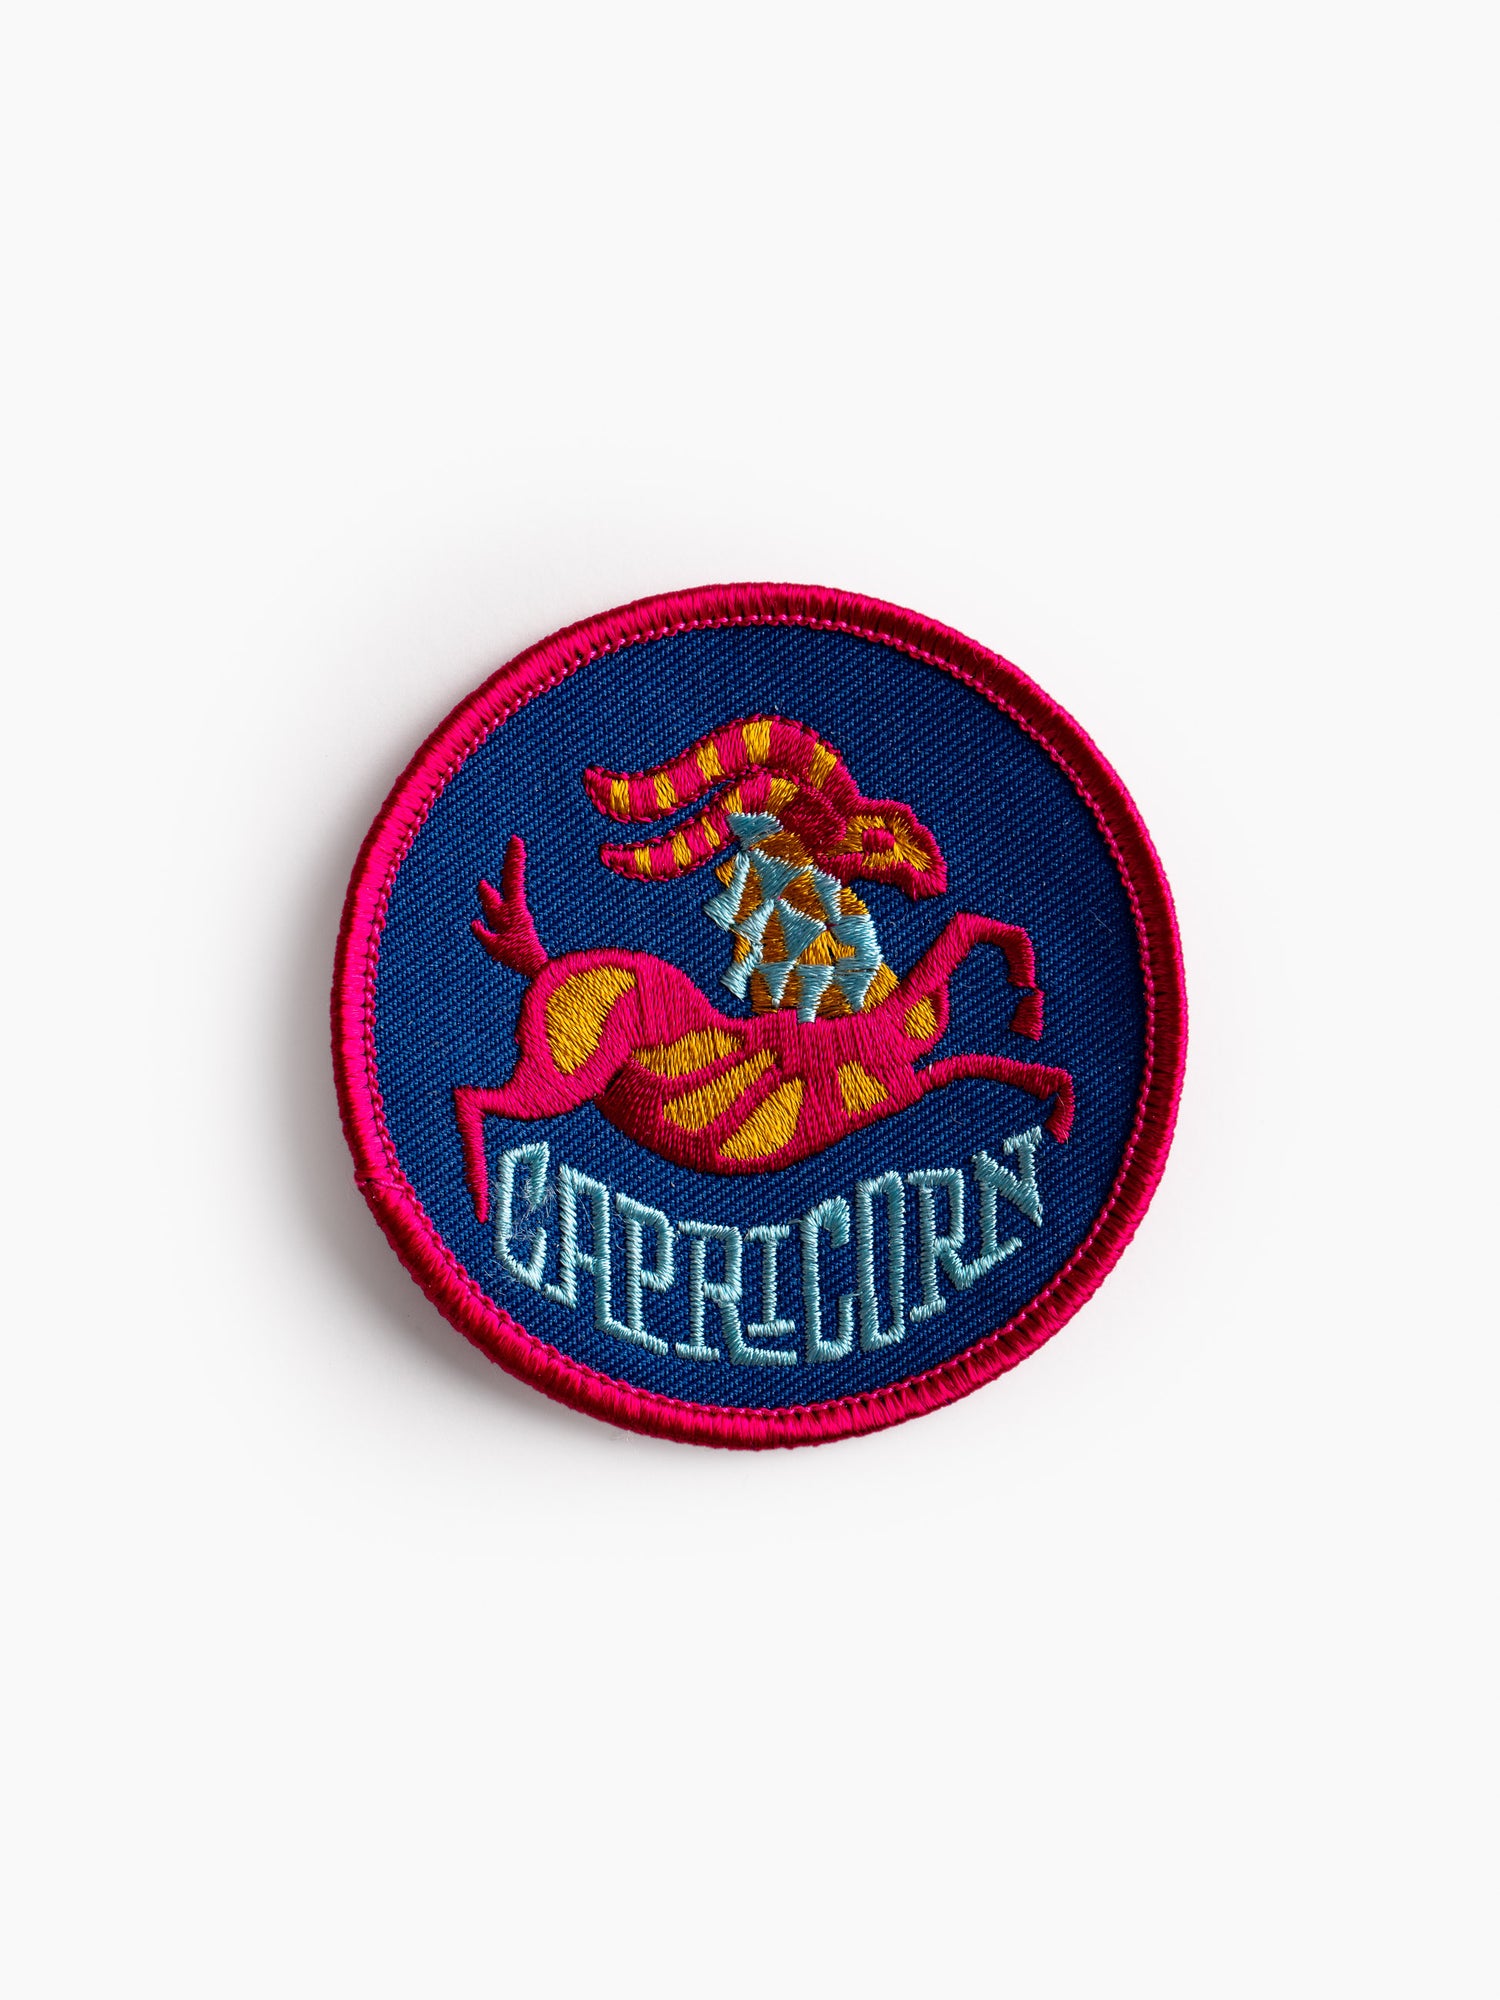 Astrological Patches